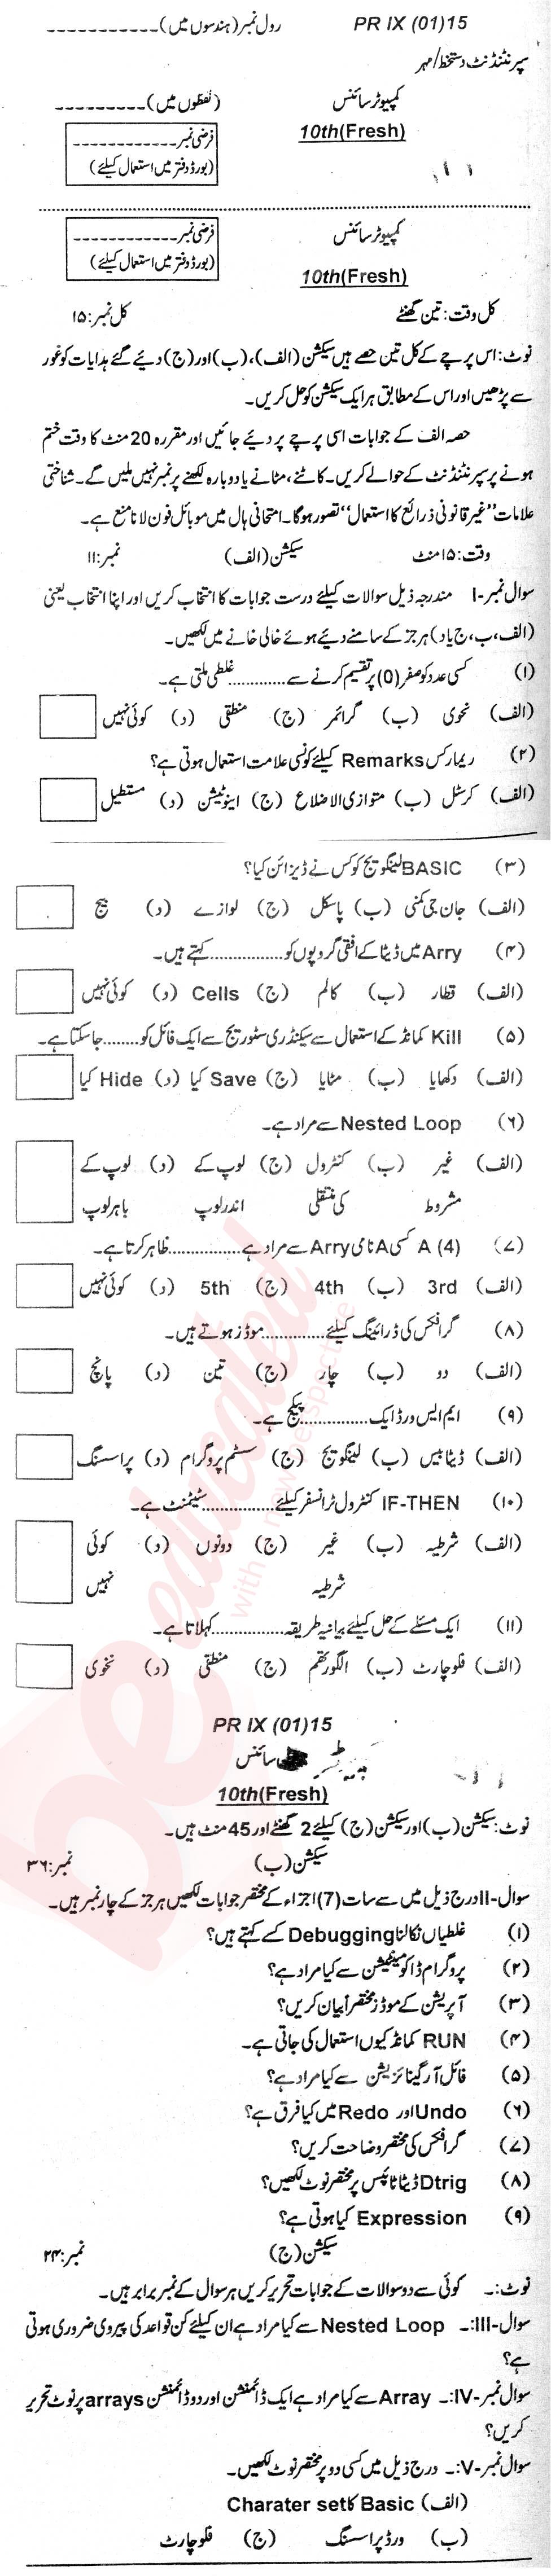 Computer Science 10th Urdu Medium Past Paper Group 1 BISE Malakand 2015